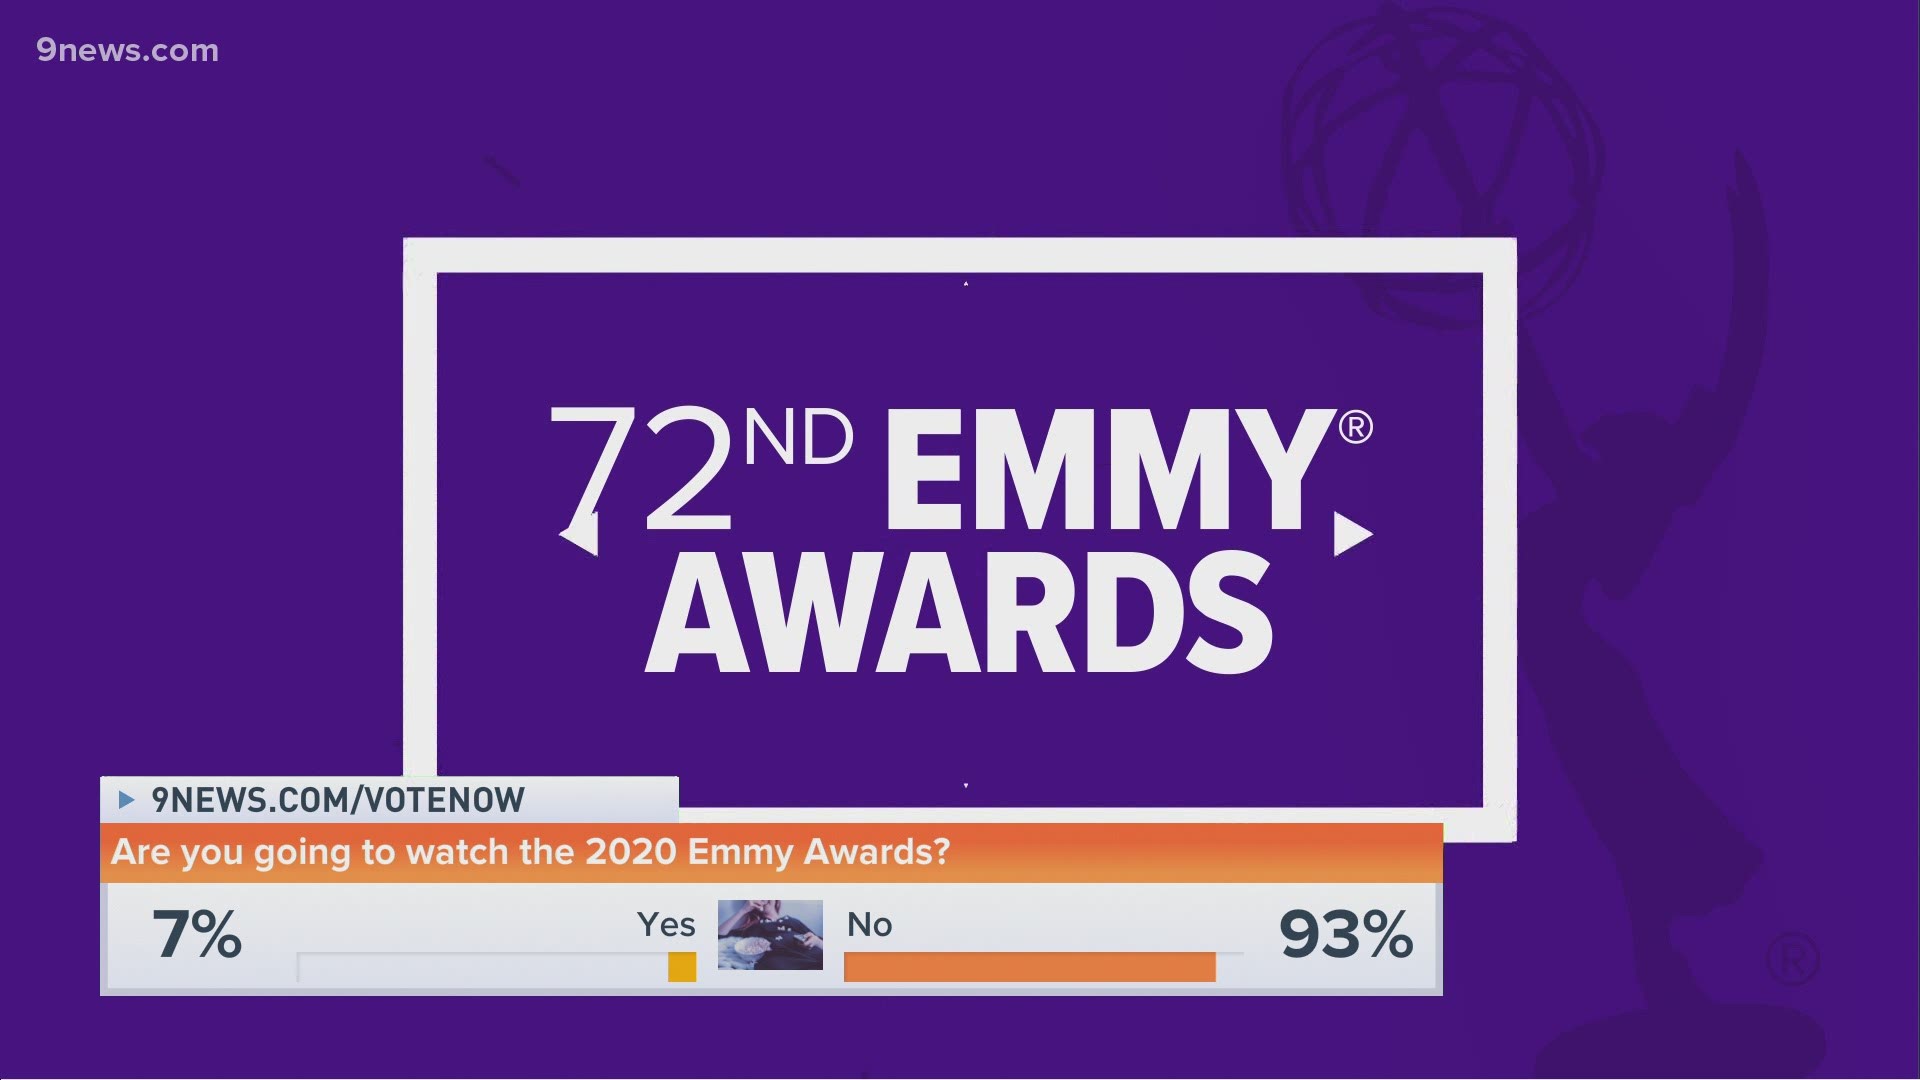 The 2020 Emmy Awards ceremony is Sunday night, and it's going virtual this year. Let us know if you'll be watching at 9news.com/votenow.